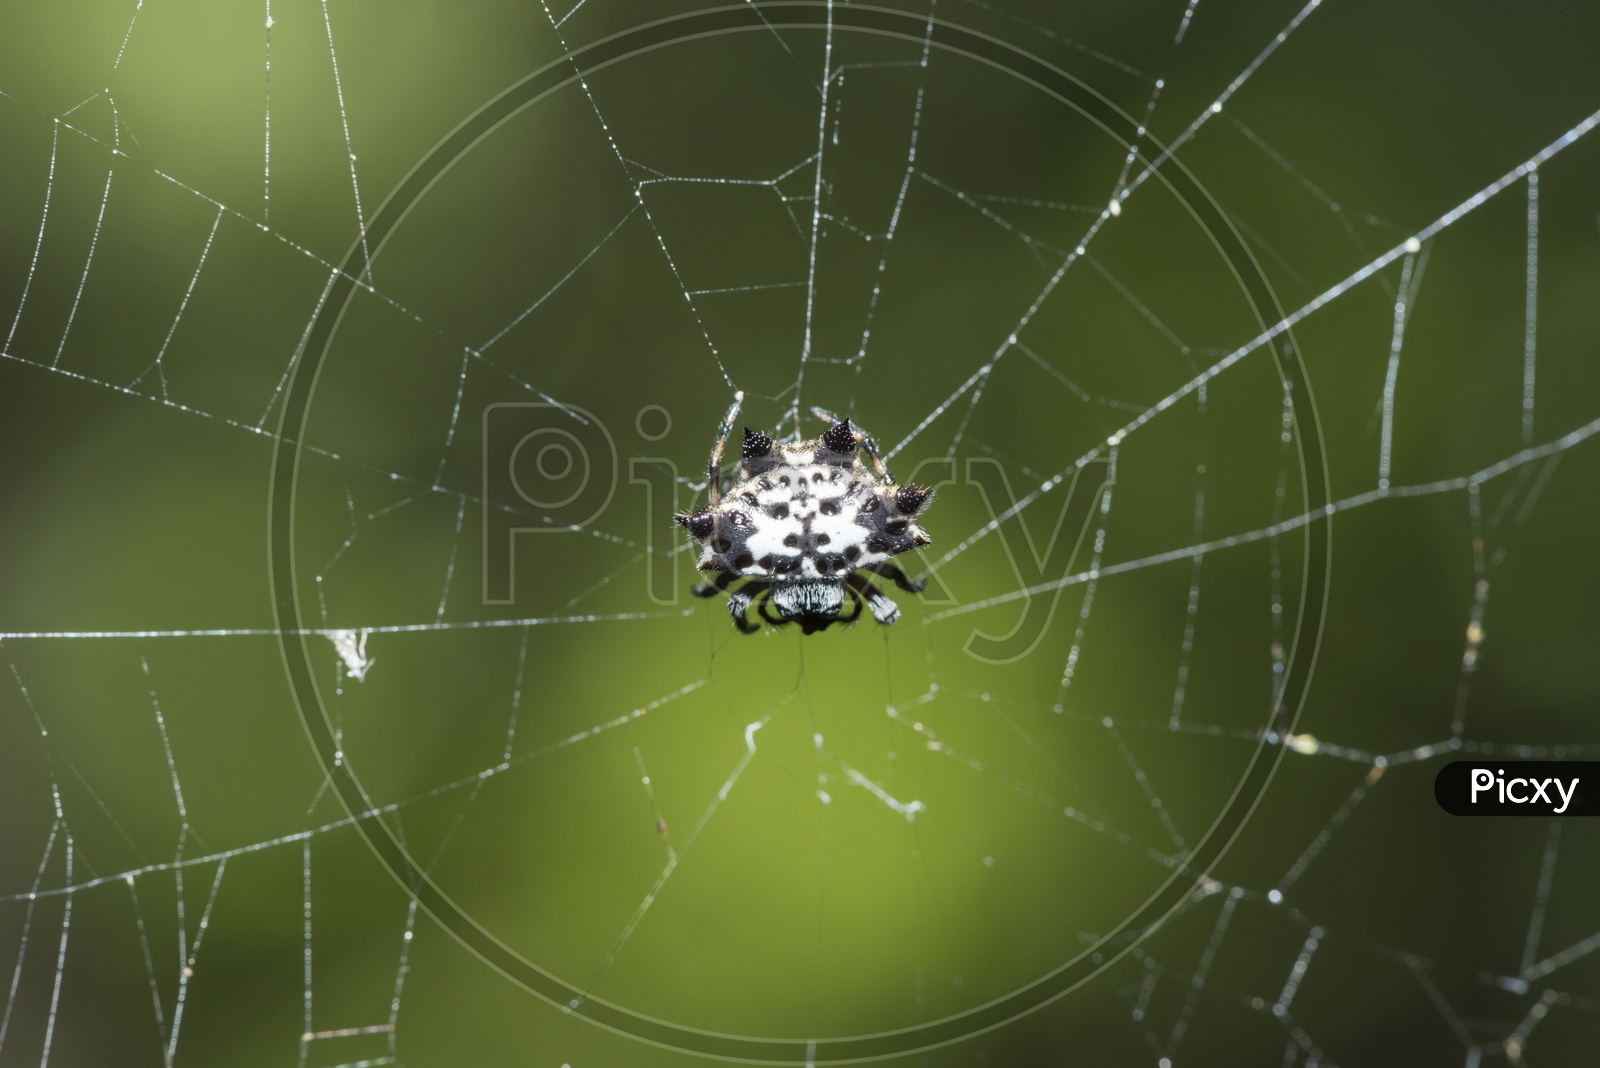 Spider In Web comb